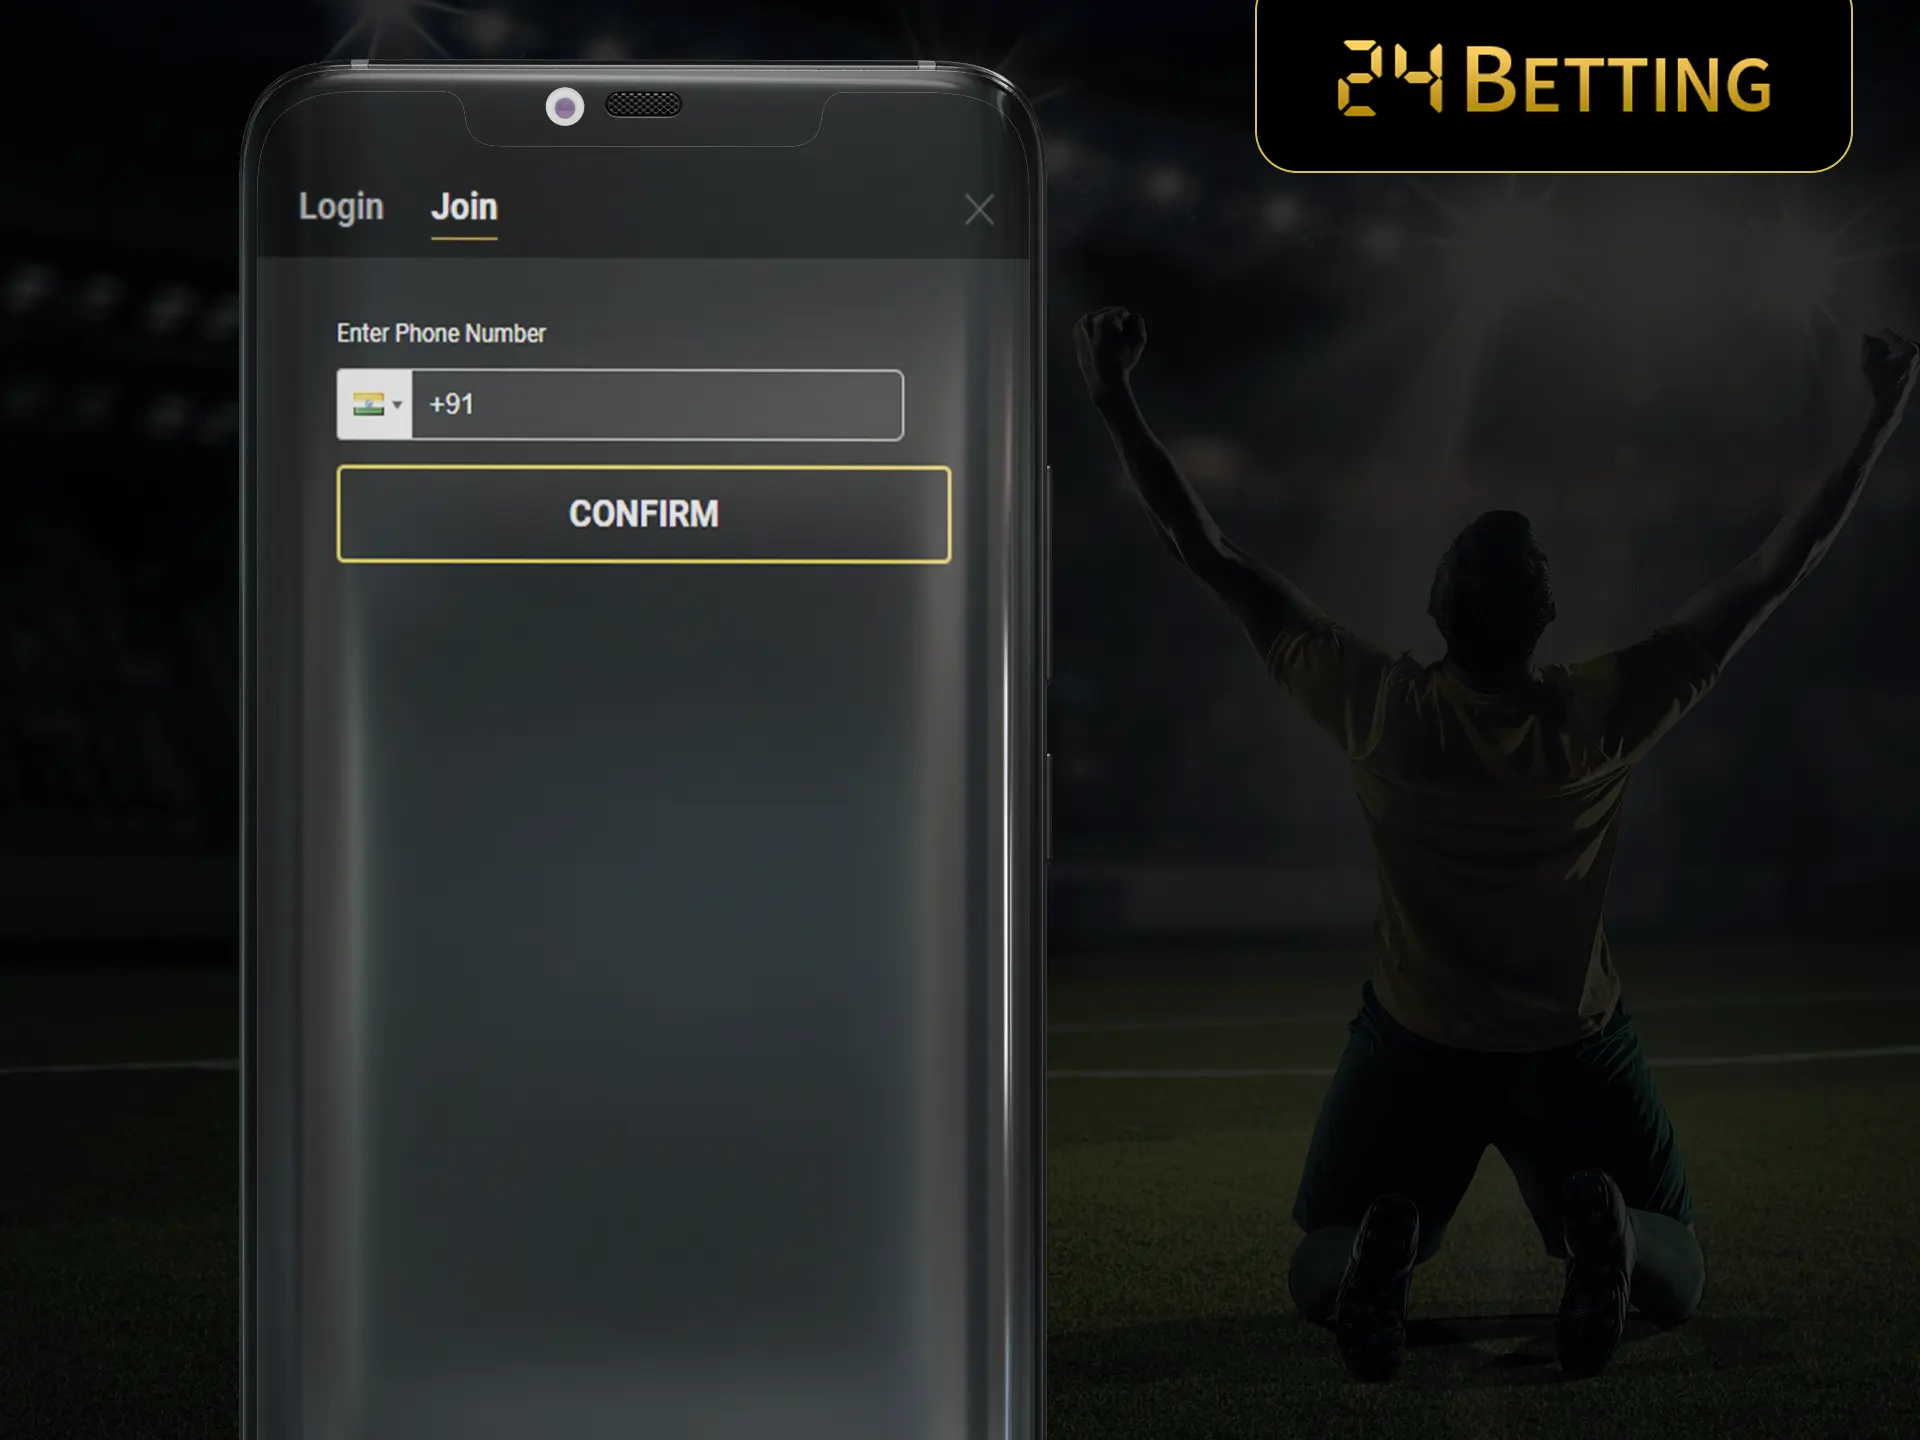 Complete a simple registration in the 24Betting app.